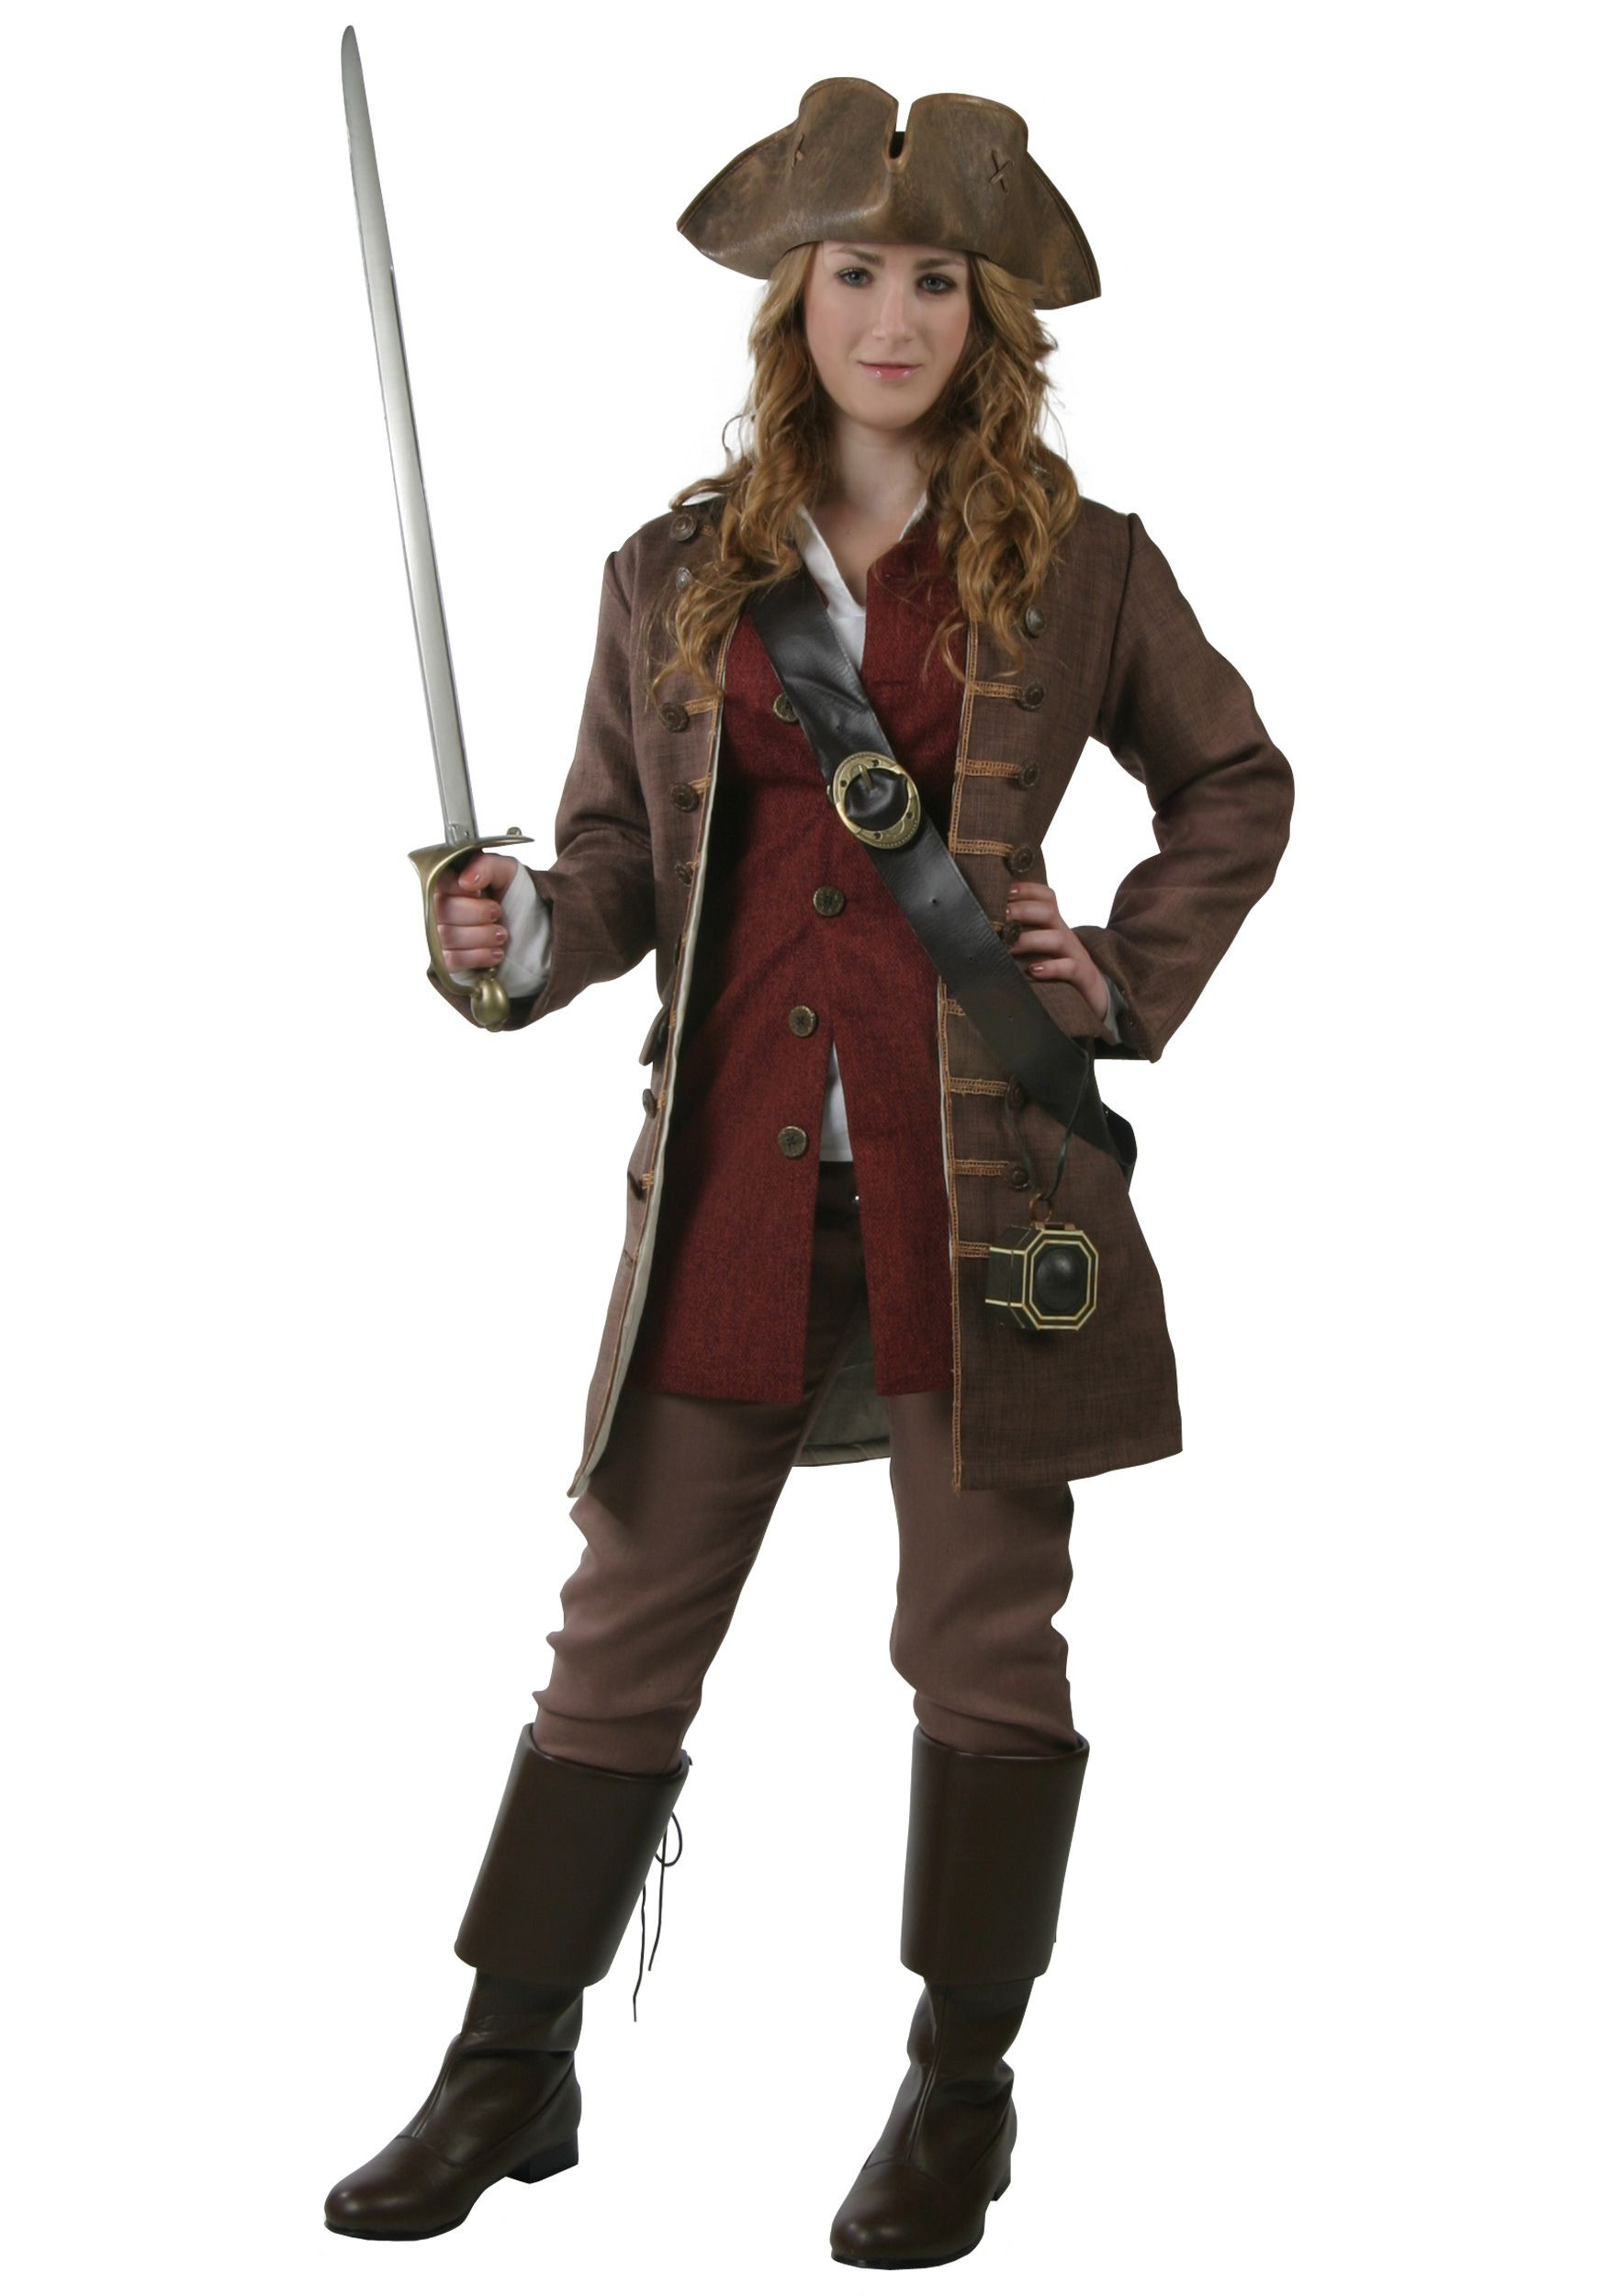 DIY Pirate Costume For Adults
 Womens Authentic Pirate Costume Elizabeth Swann Costumes